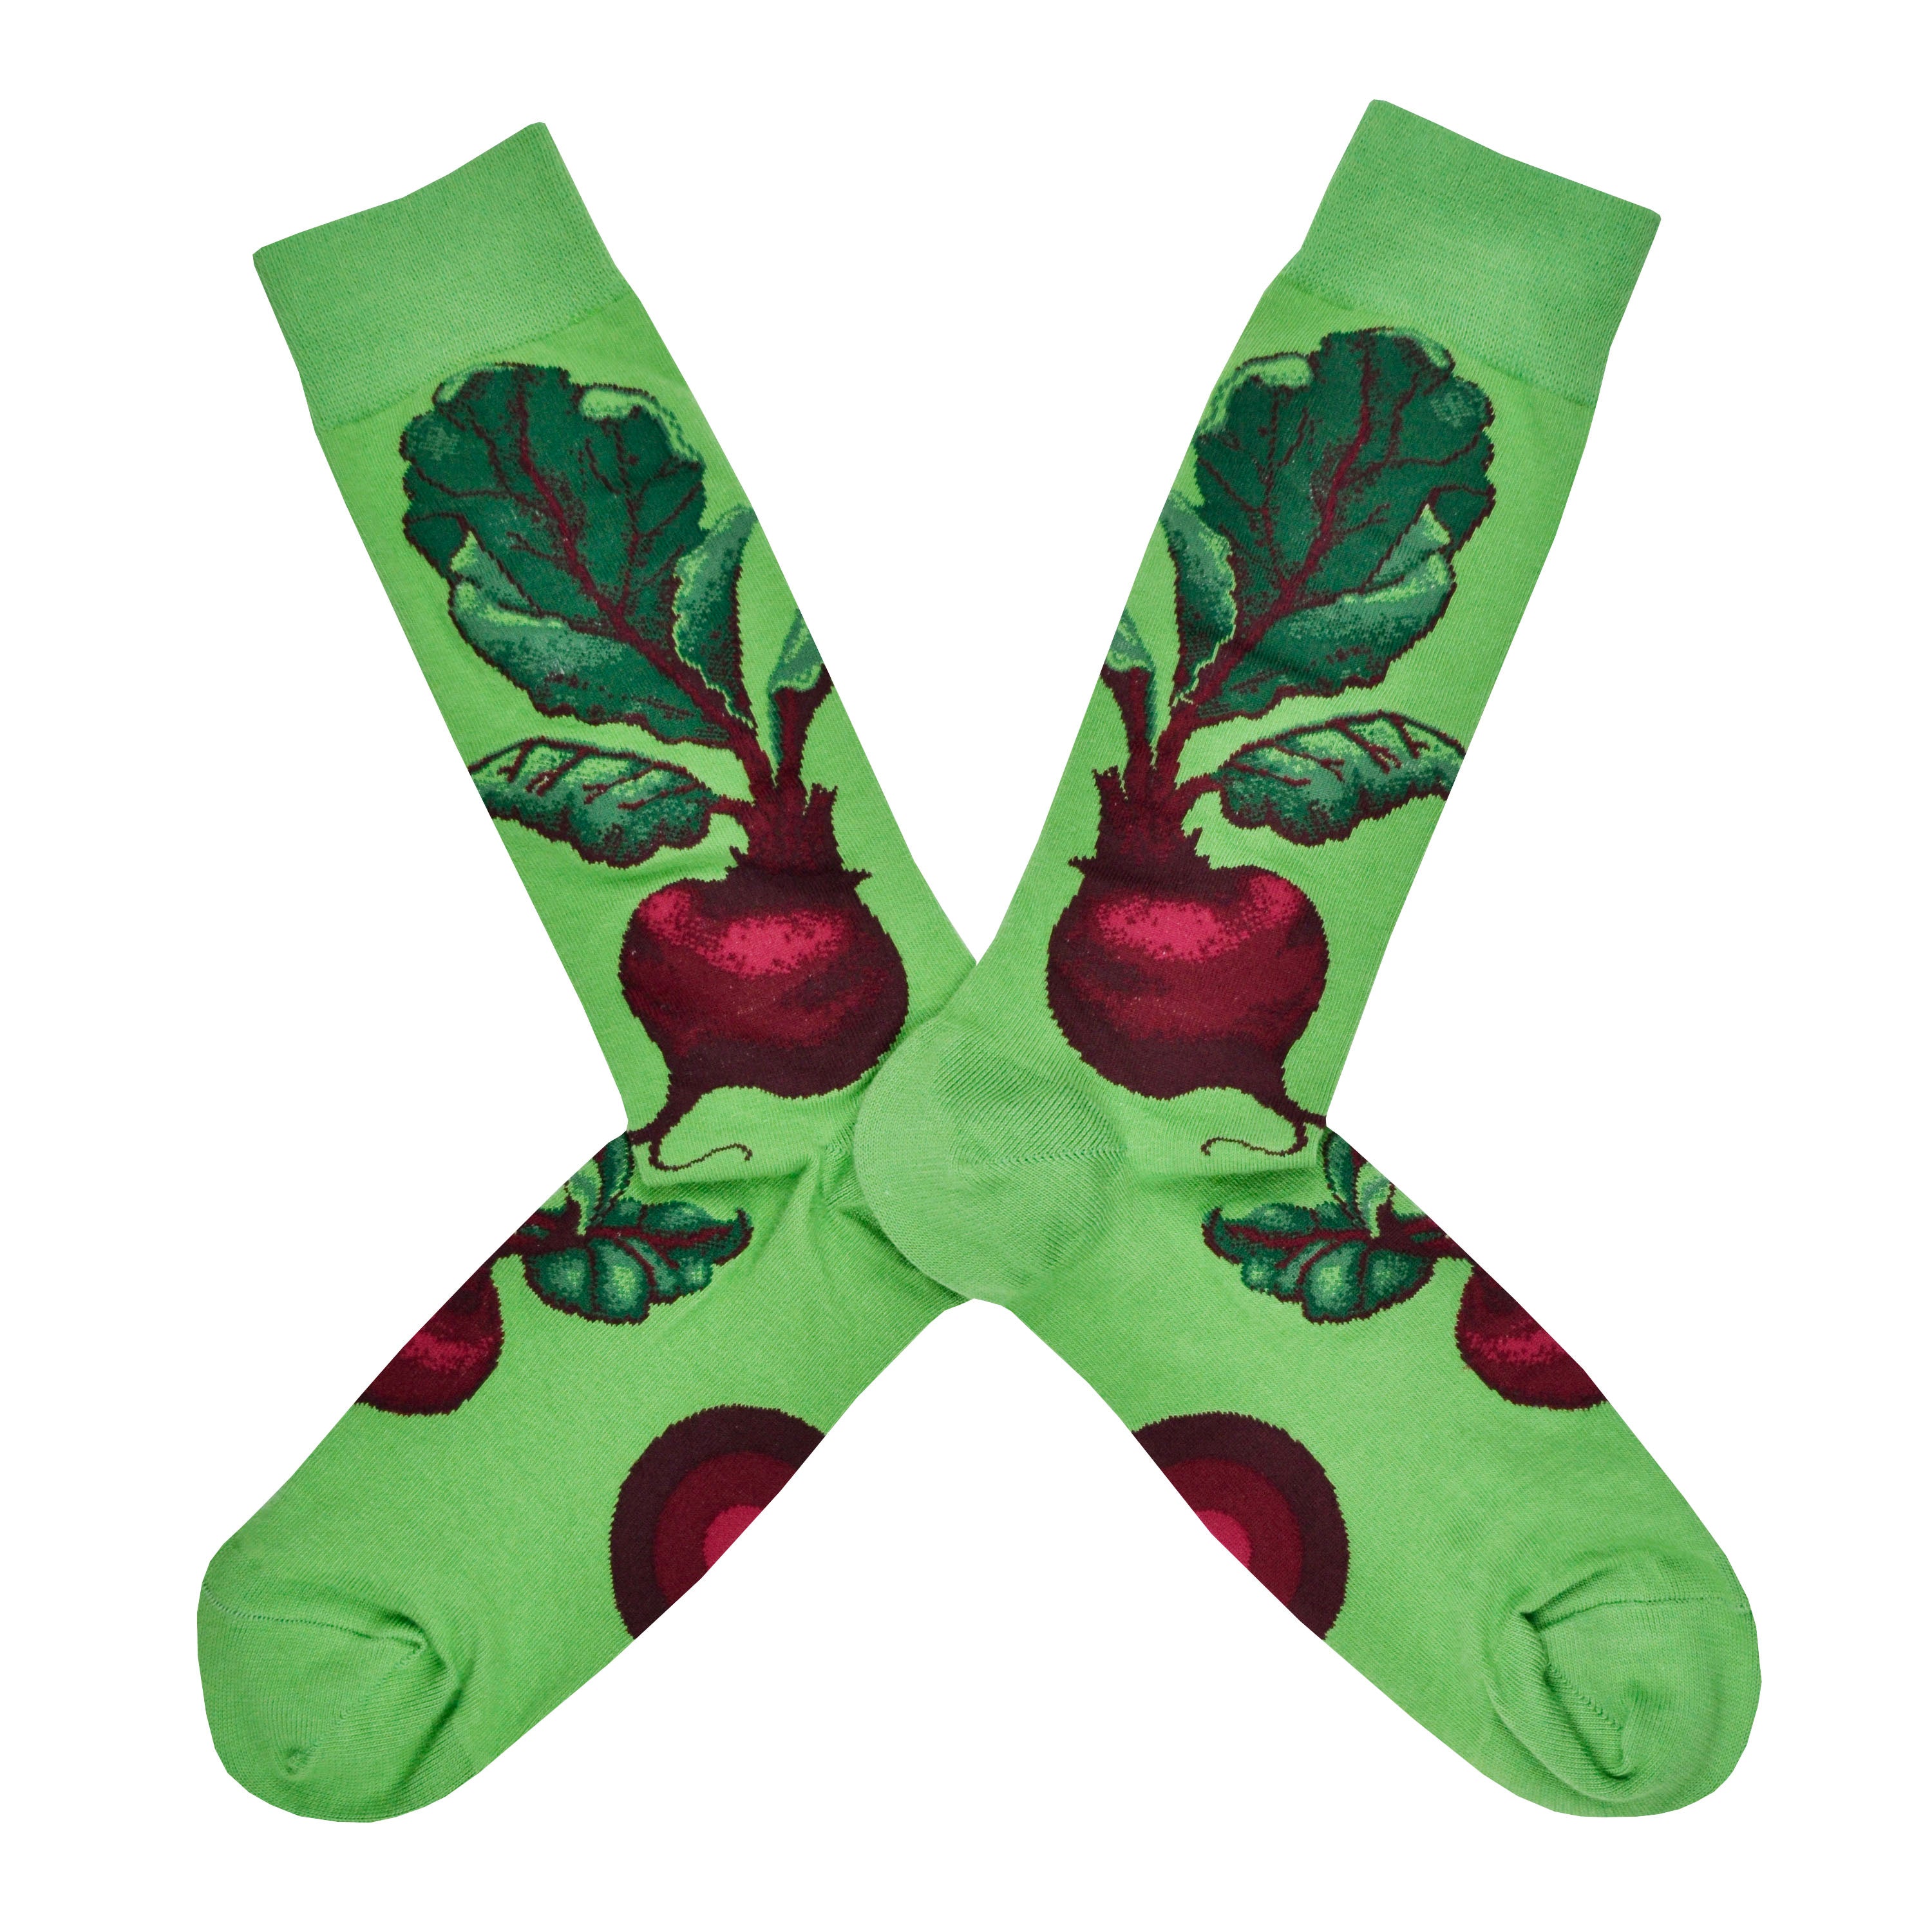 Shown in a flatlay, a pair of Mod Socks’ green cotton men's crew socks with large, uprooted beetroot plant